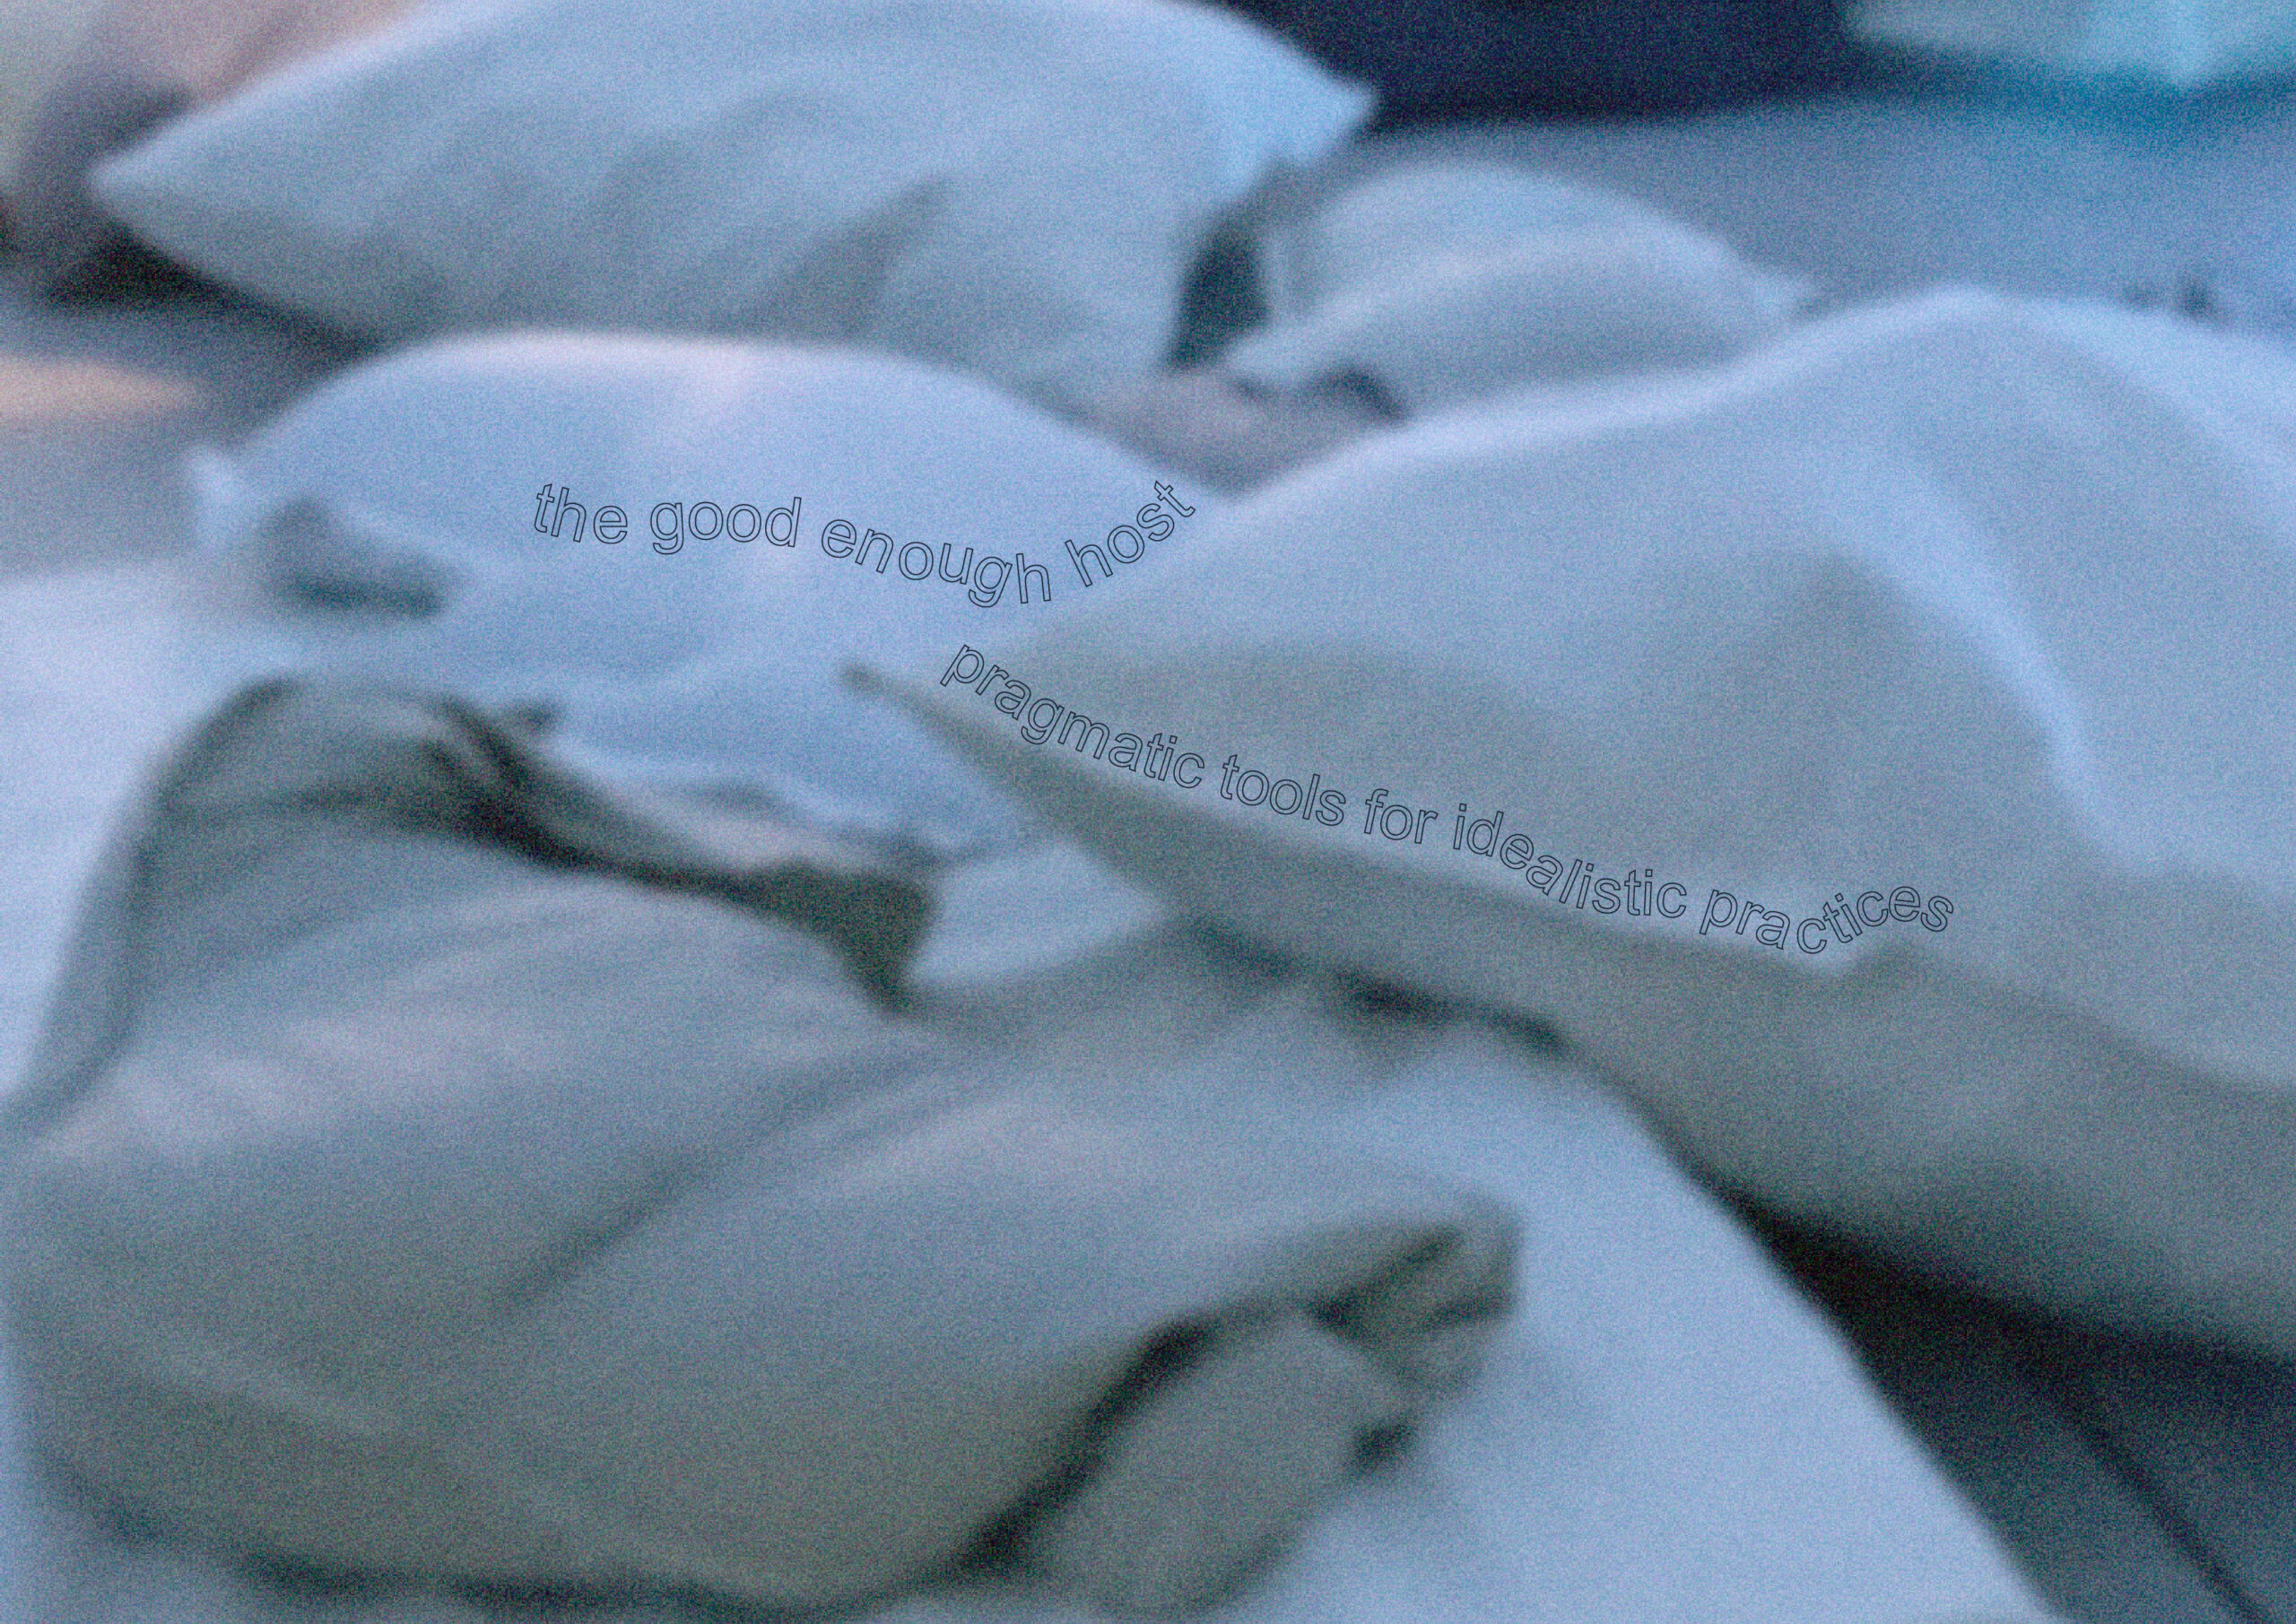 The good enough host - pragmatic tools for idealistic practices